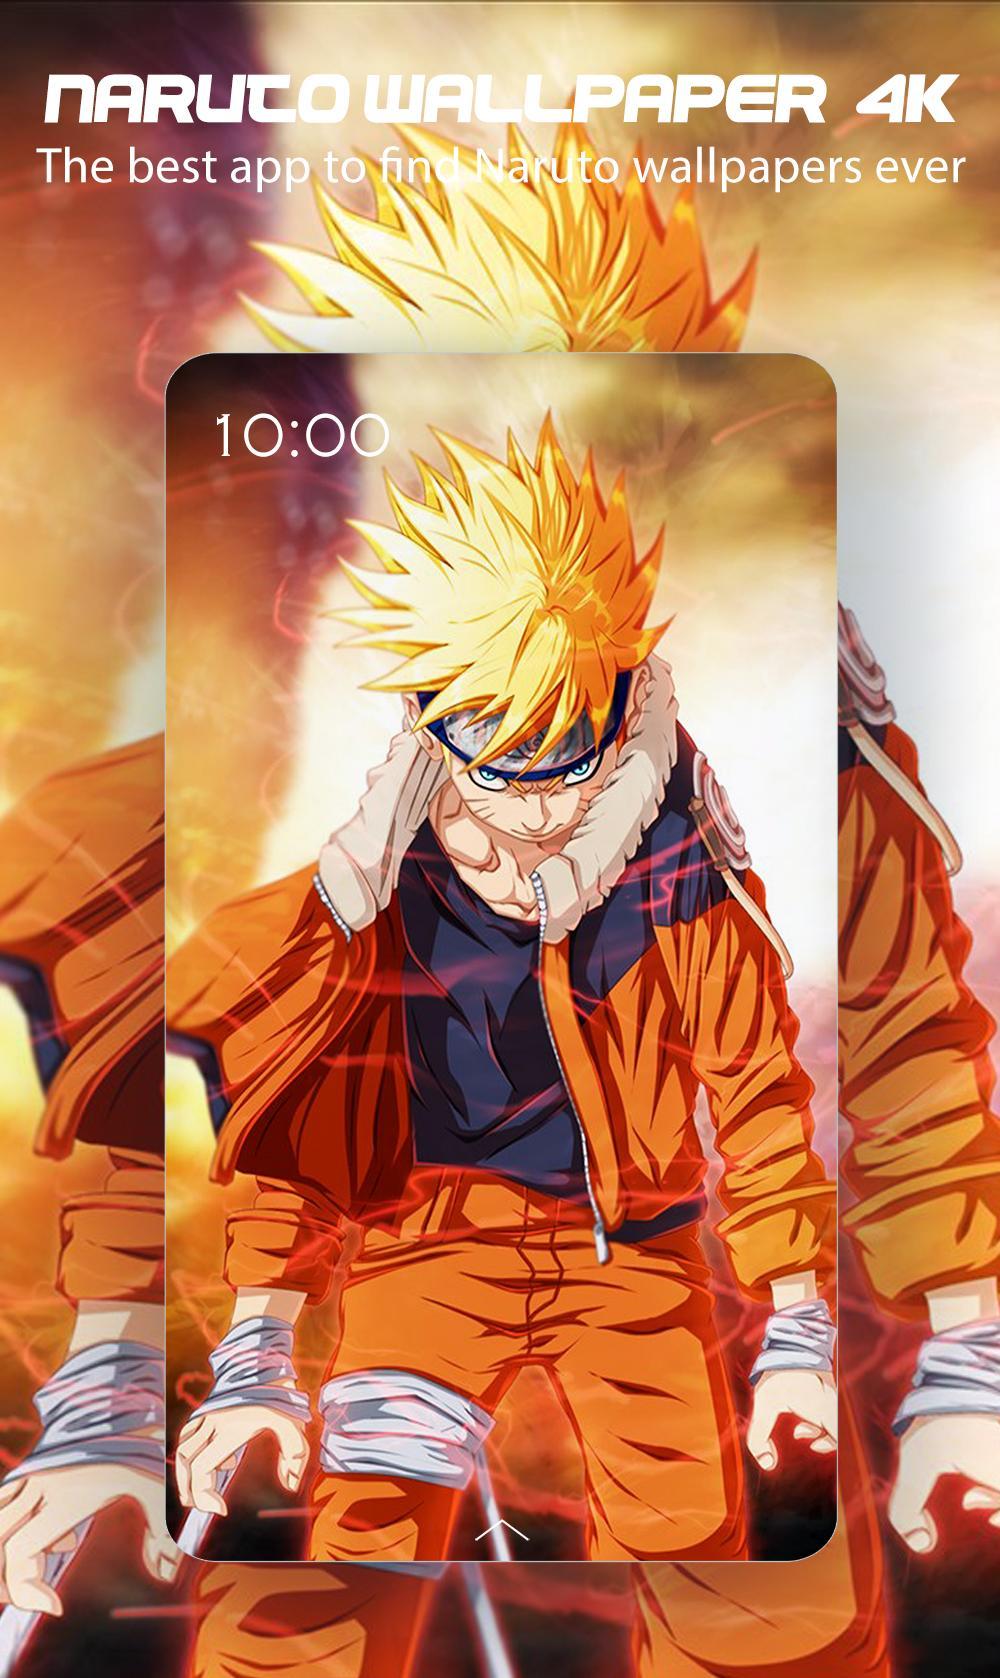 Wallpapers Of Naruto 4K - Best Naruto background APK for Android Download